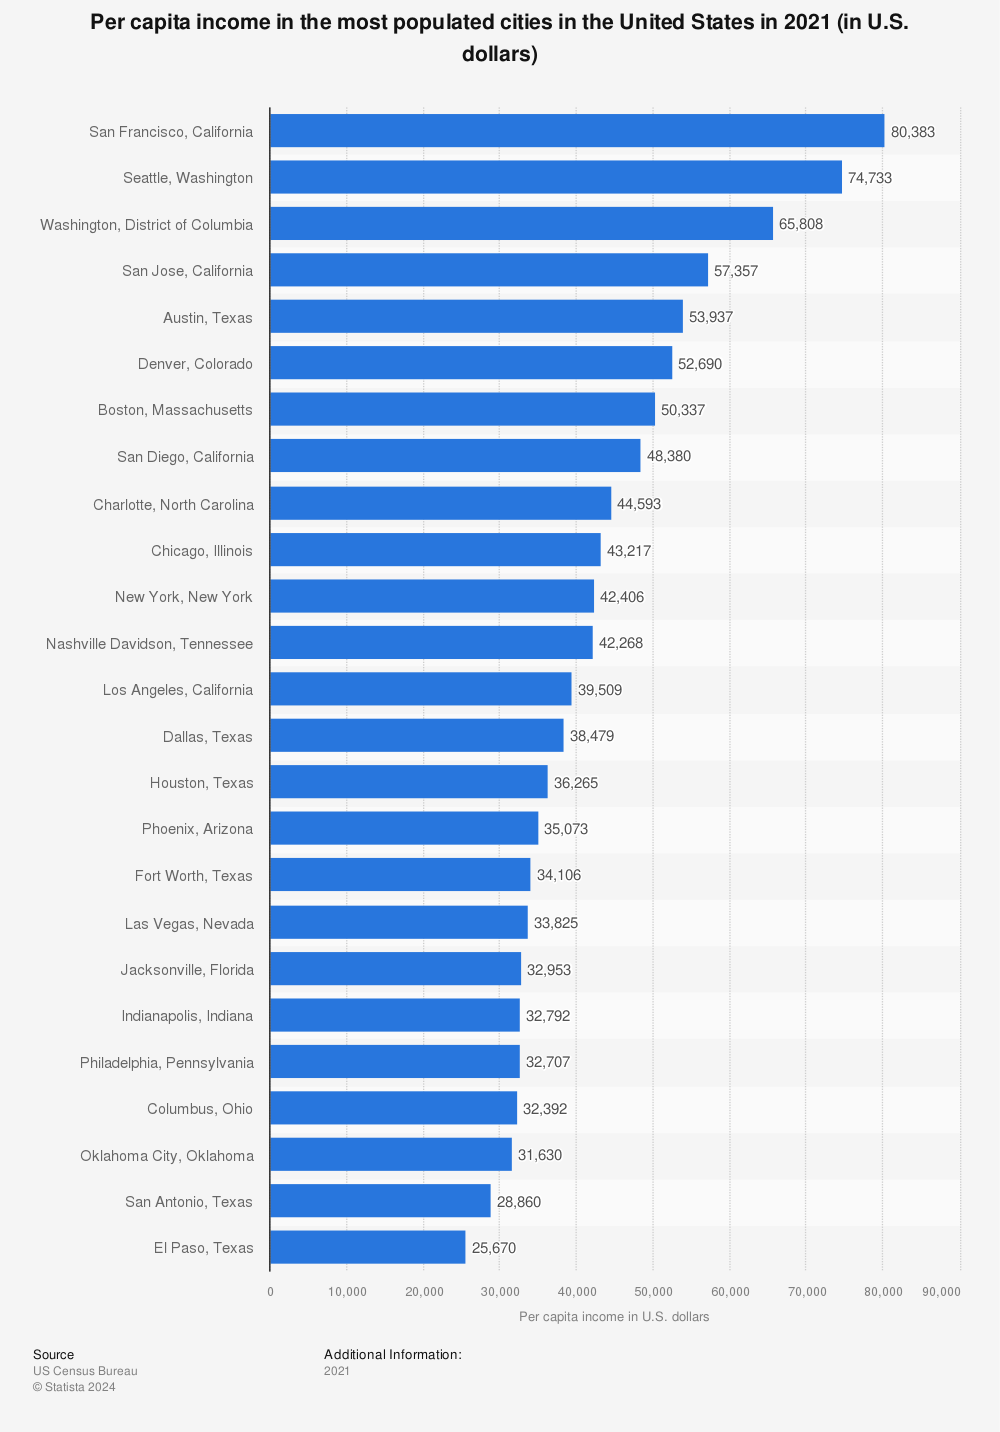 Statistic: Per capita income in the most populated cities in the United States in 2021 (in U.S. dollars) | Statista